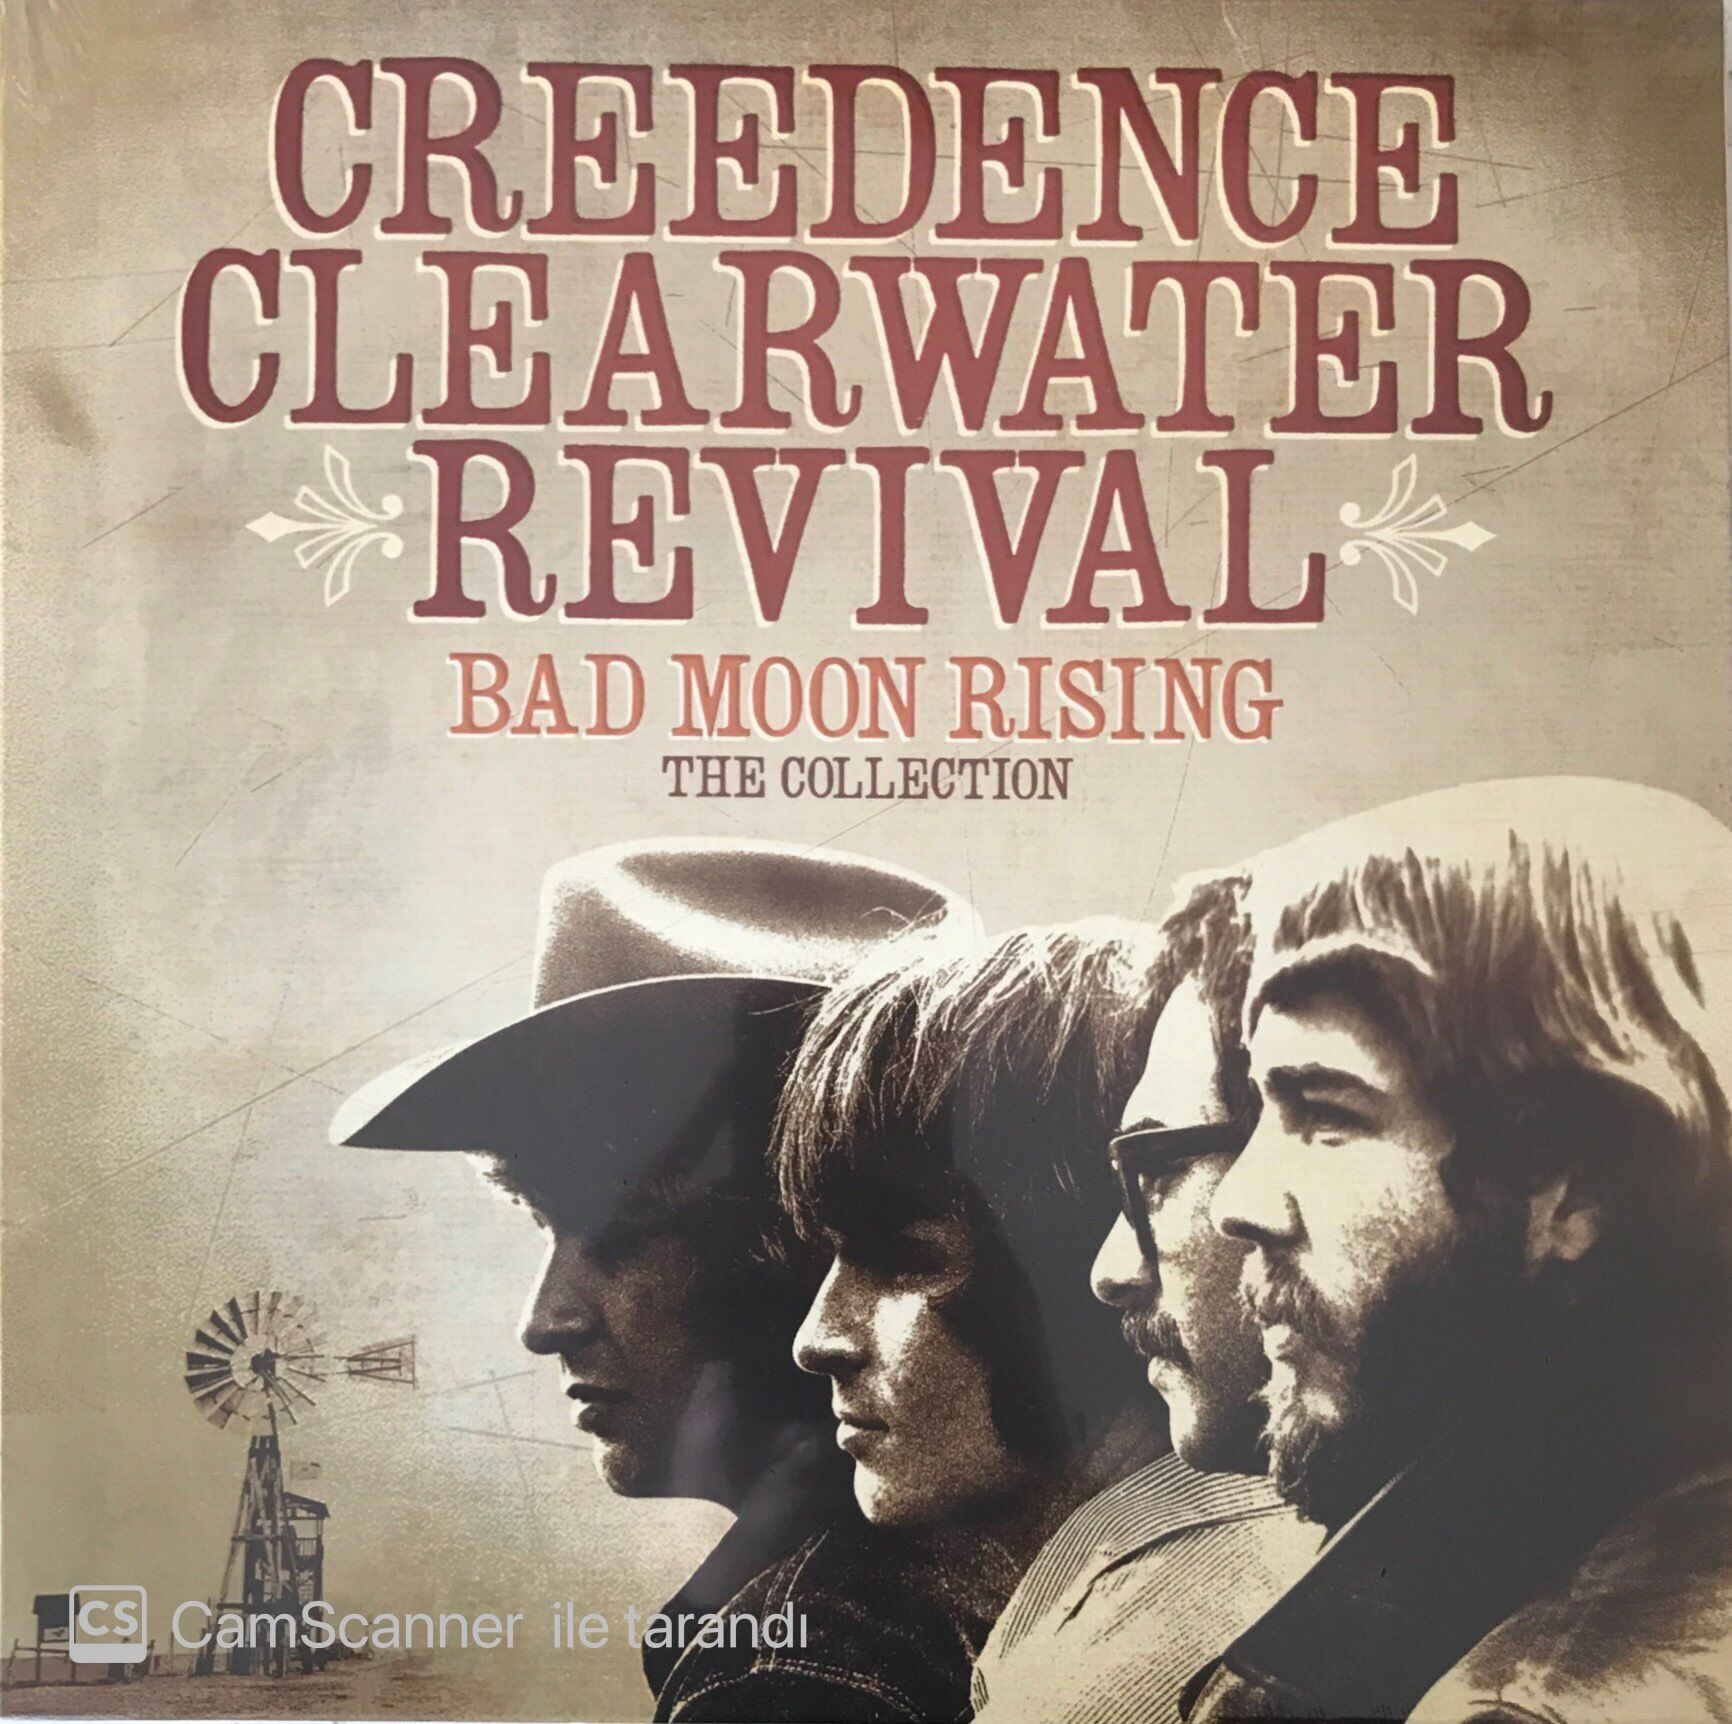 Creedence Clearwater Revival - Bad Moon Rising LP